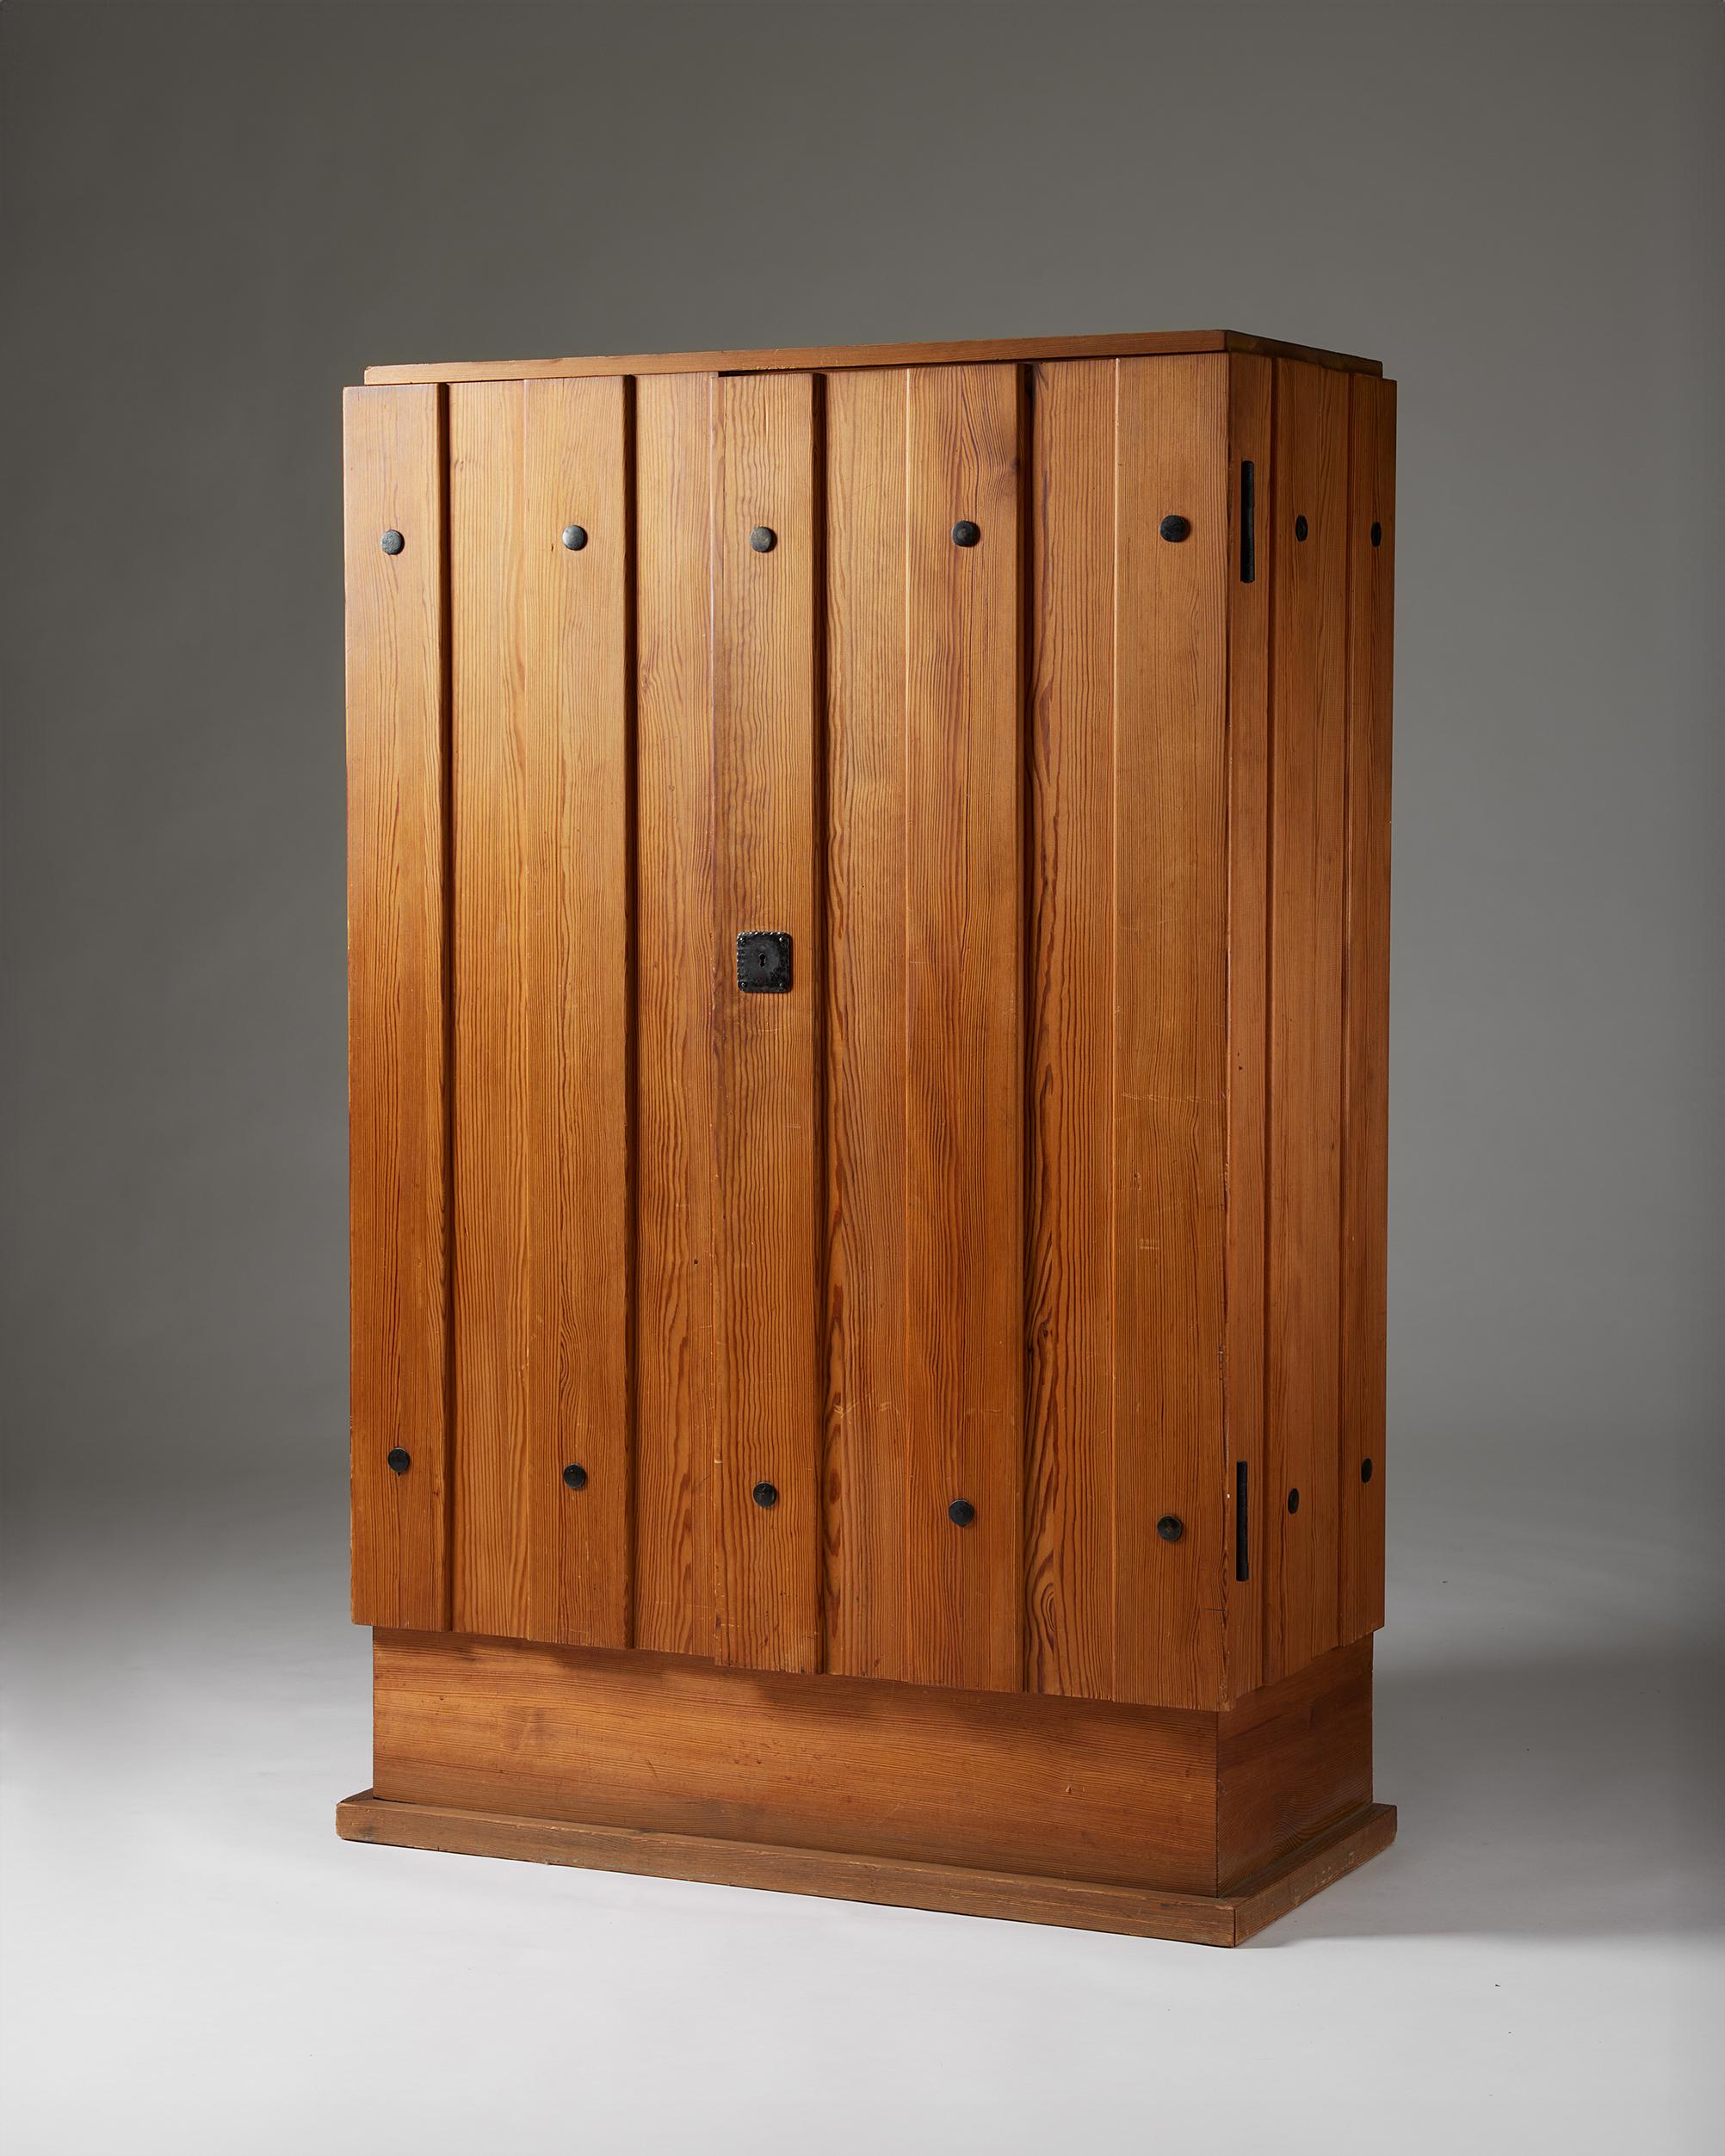 Cabinet ‘Lovö’ designed by Axel Einar Hjorth for Nordiska Kompaniet,
Sweden, 1930s.

Pine and forged iron.

From 1927 to 1938, Axel-Einar Hjorth was the chief architect and designer at the department store Nordiska Kompaniet in Stockholm—which was